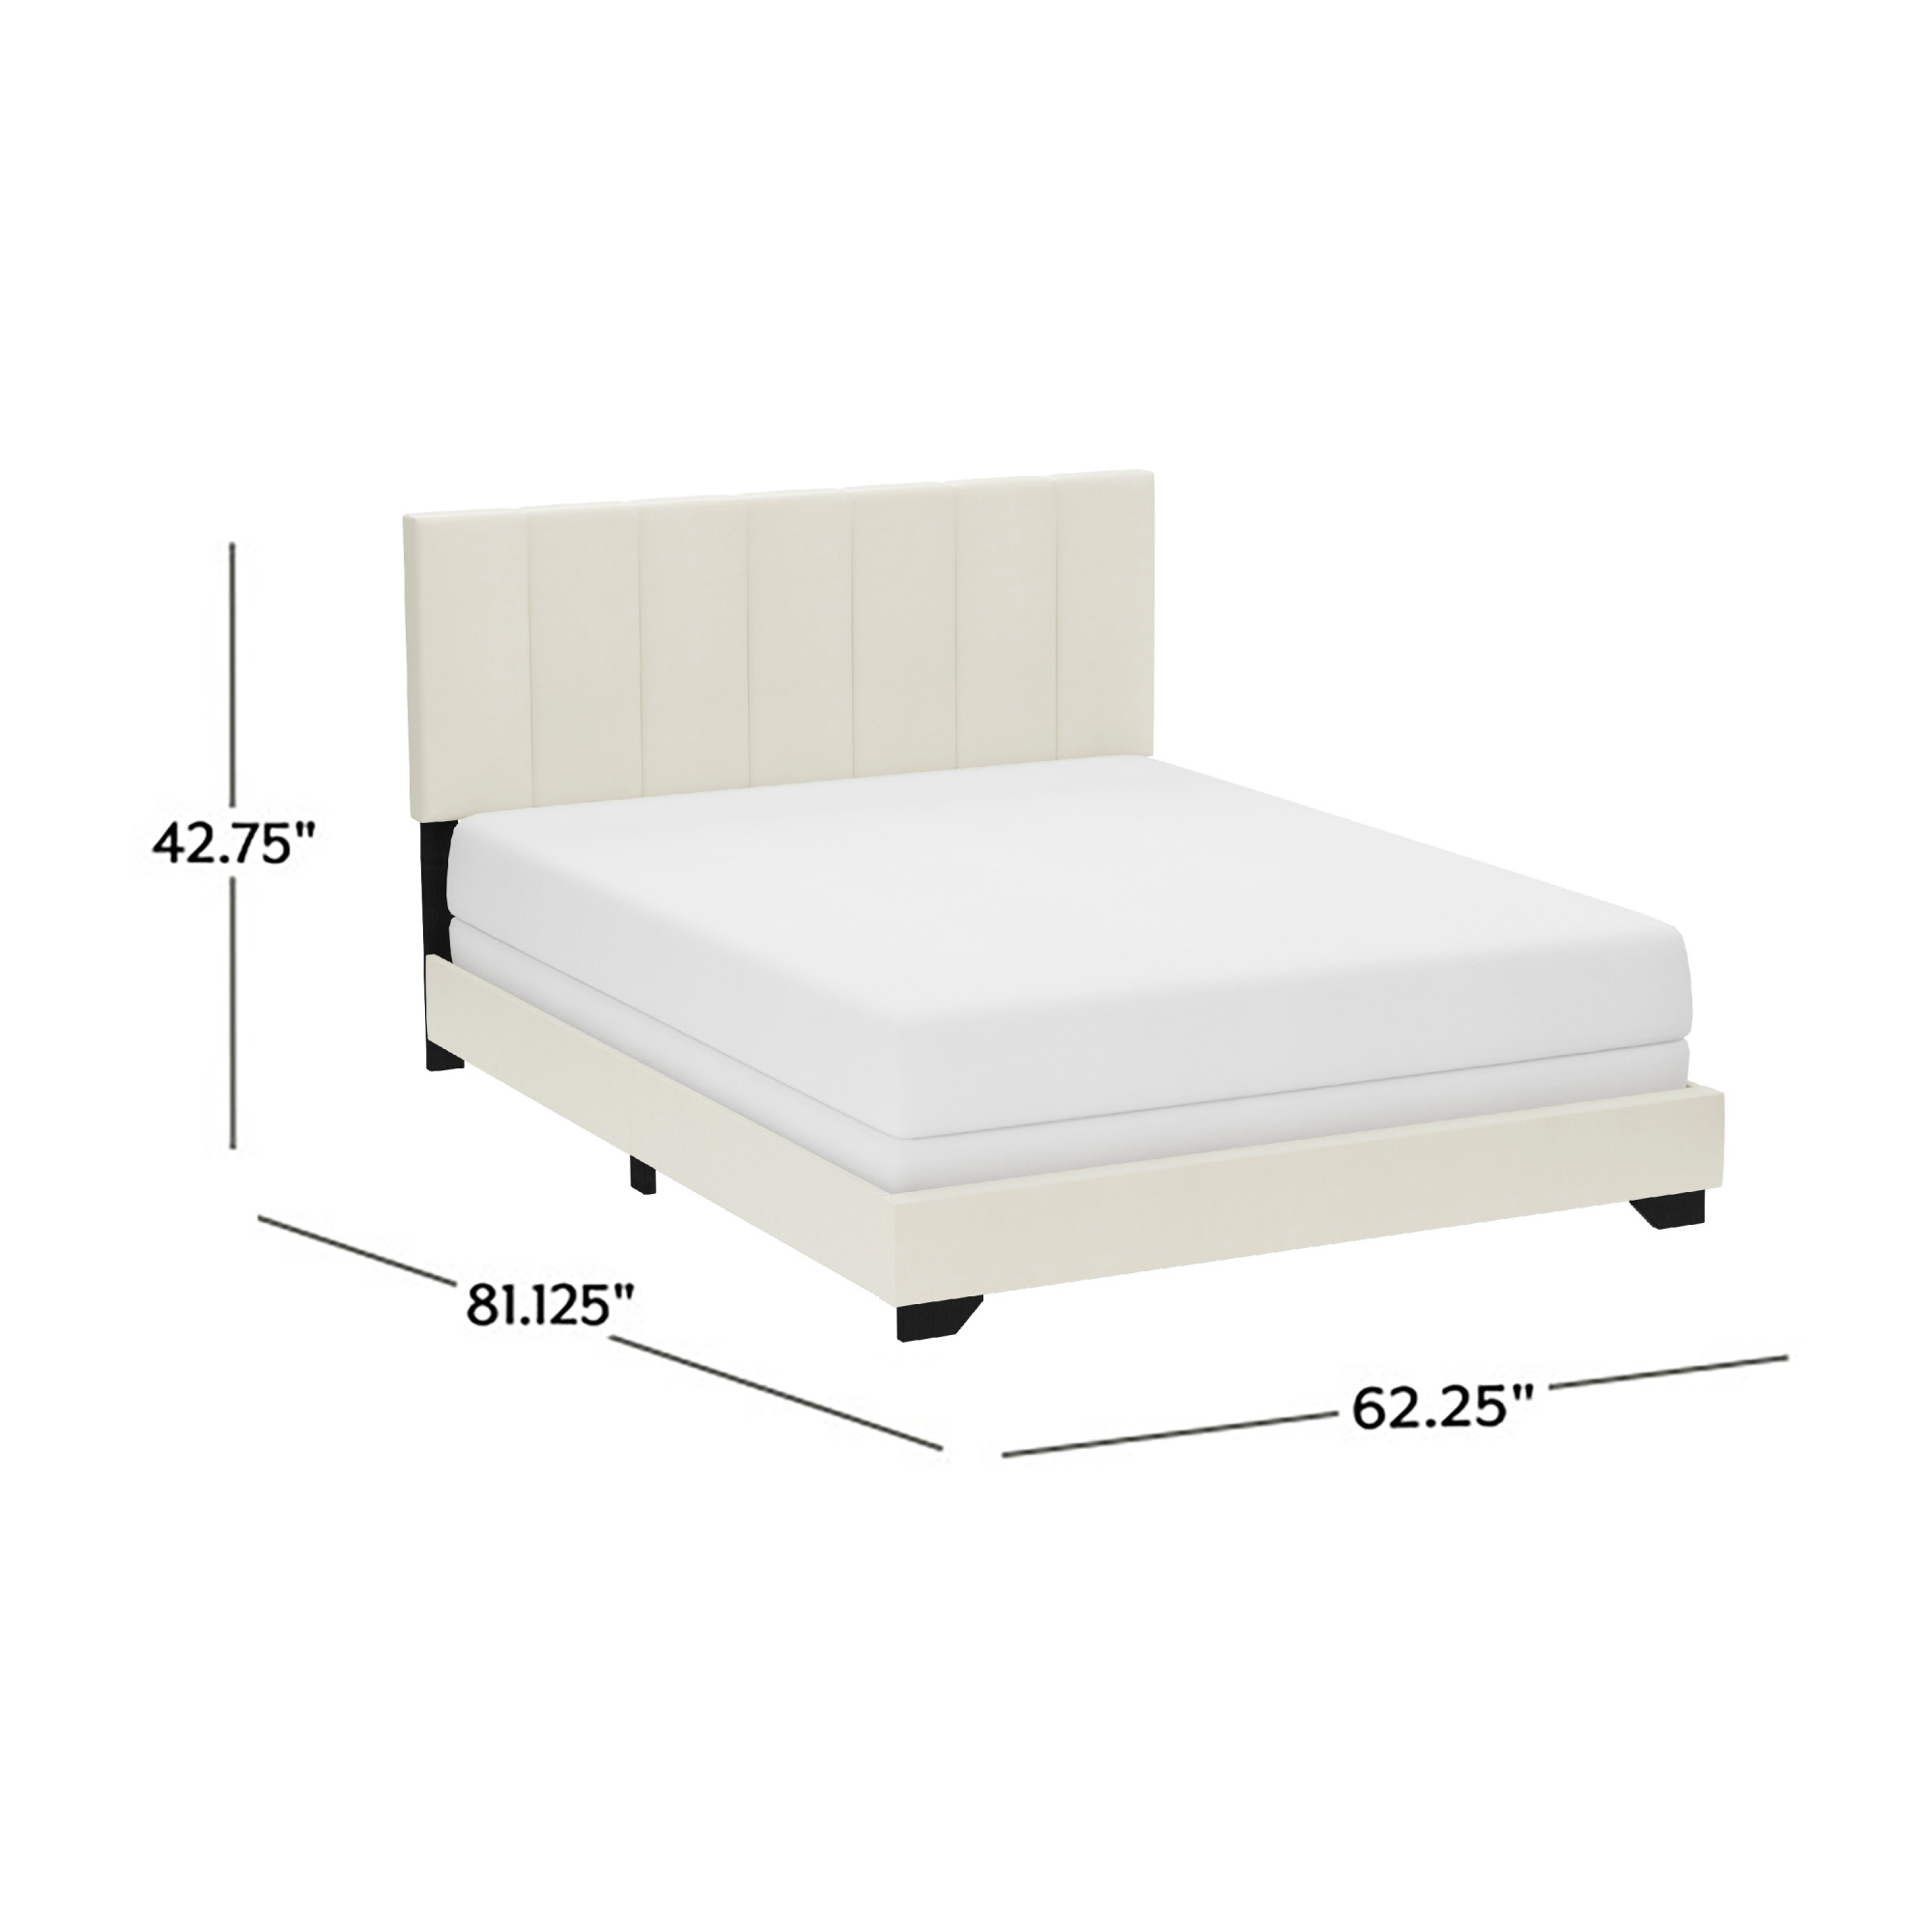 Reece Channel Stitched Upholstered Queen Bed, Ivory, by Hillsdale Living Essentials - image 4 of 17